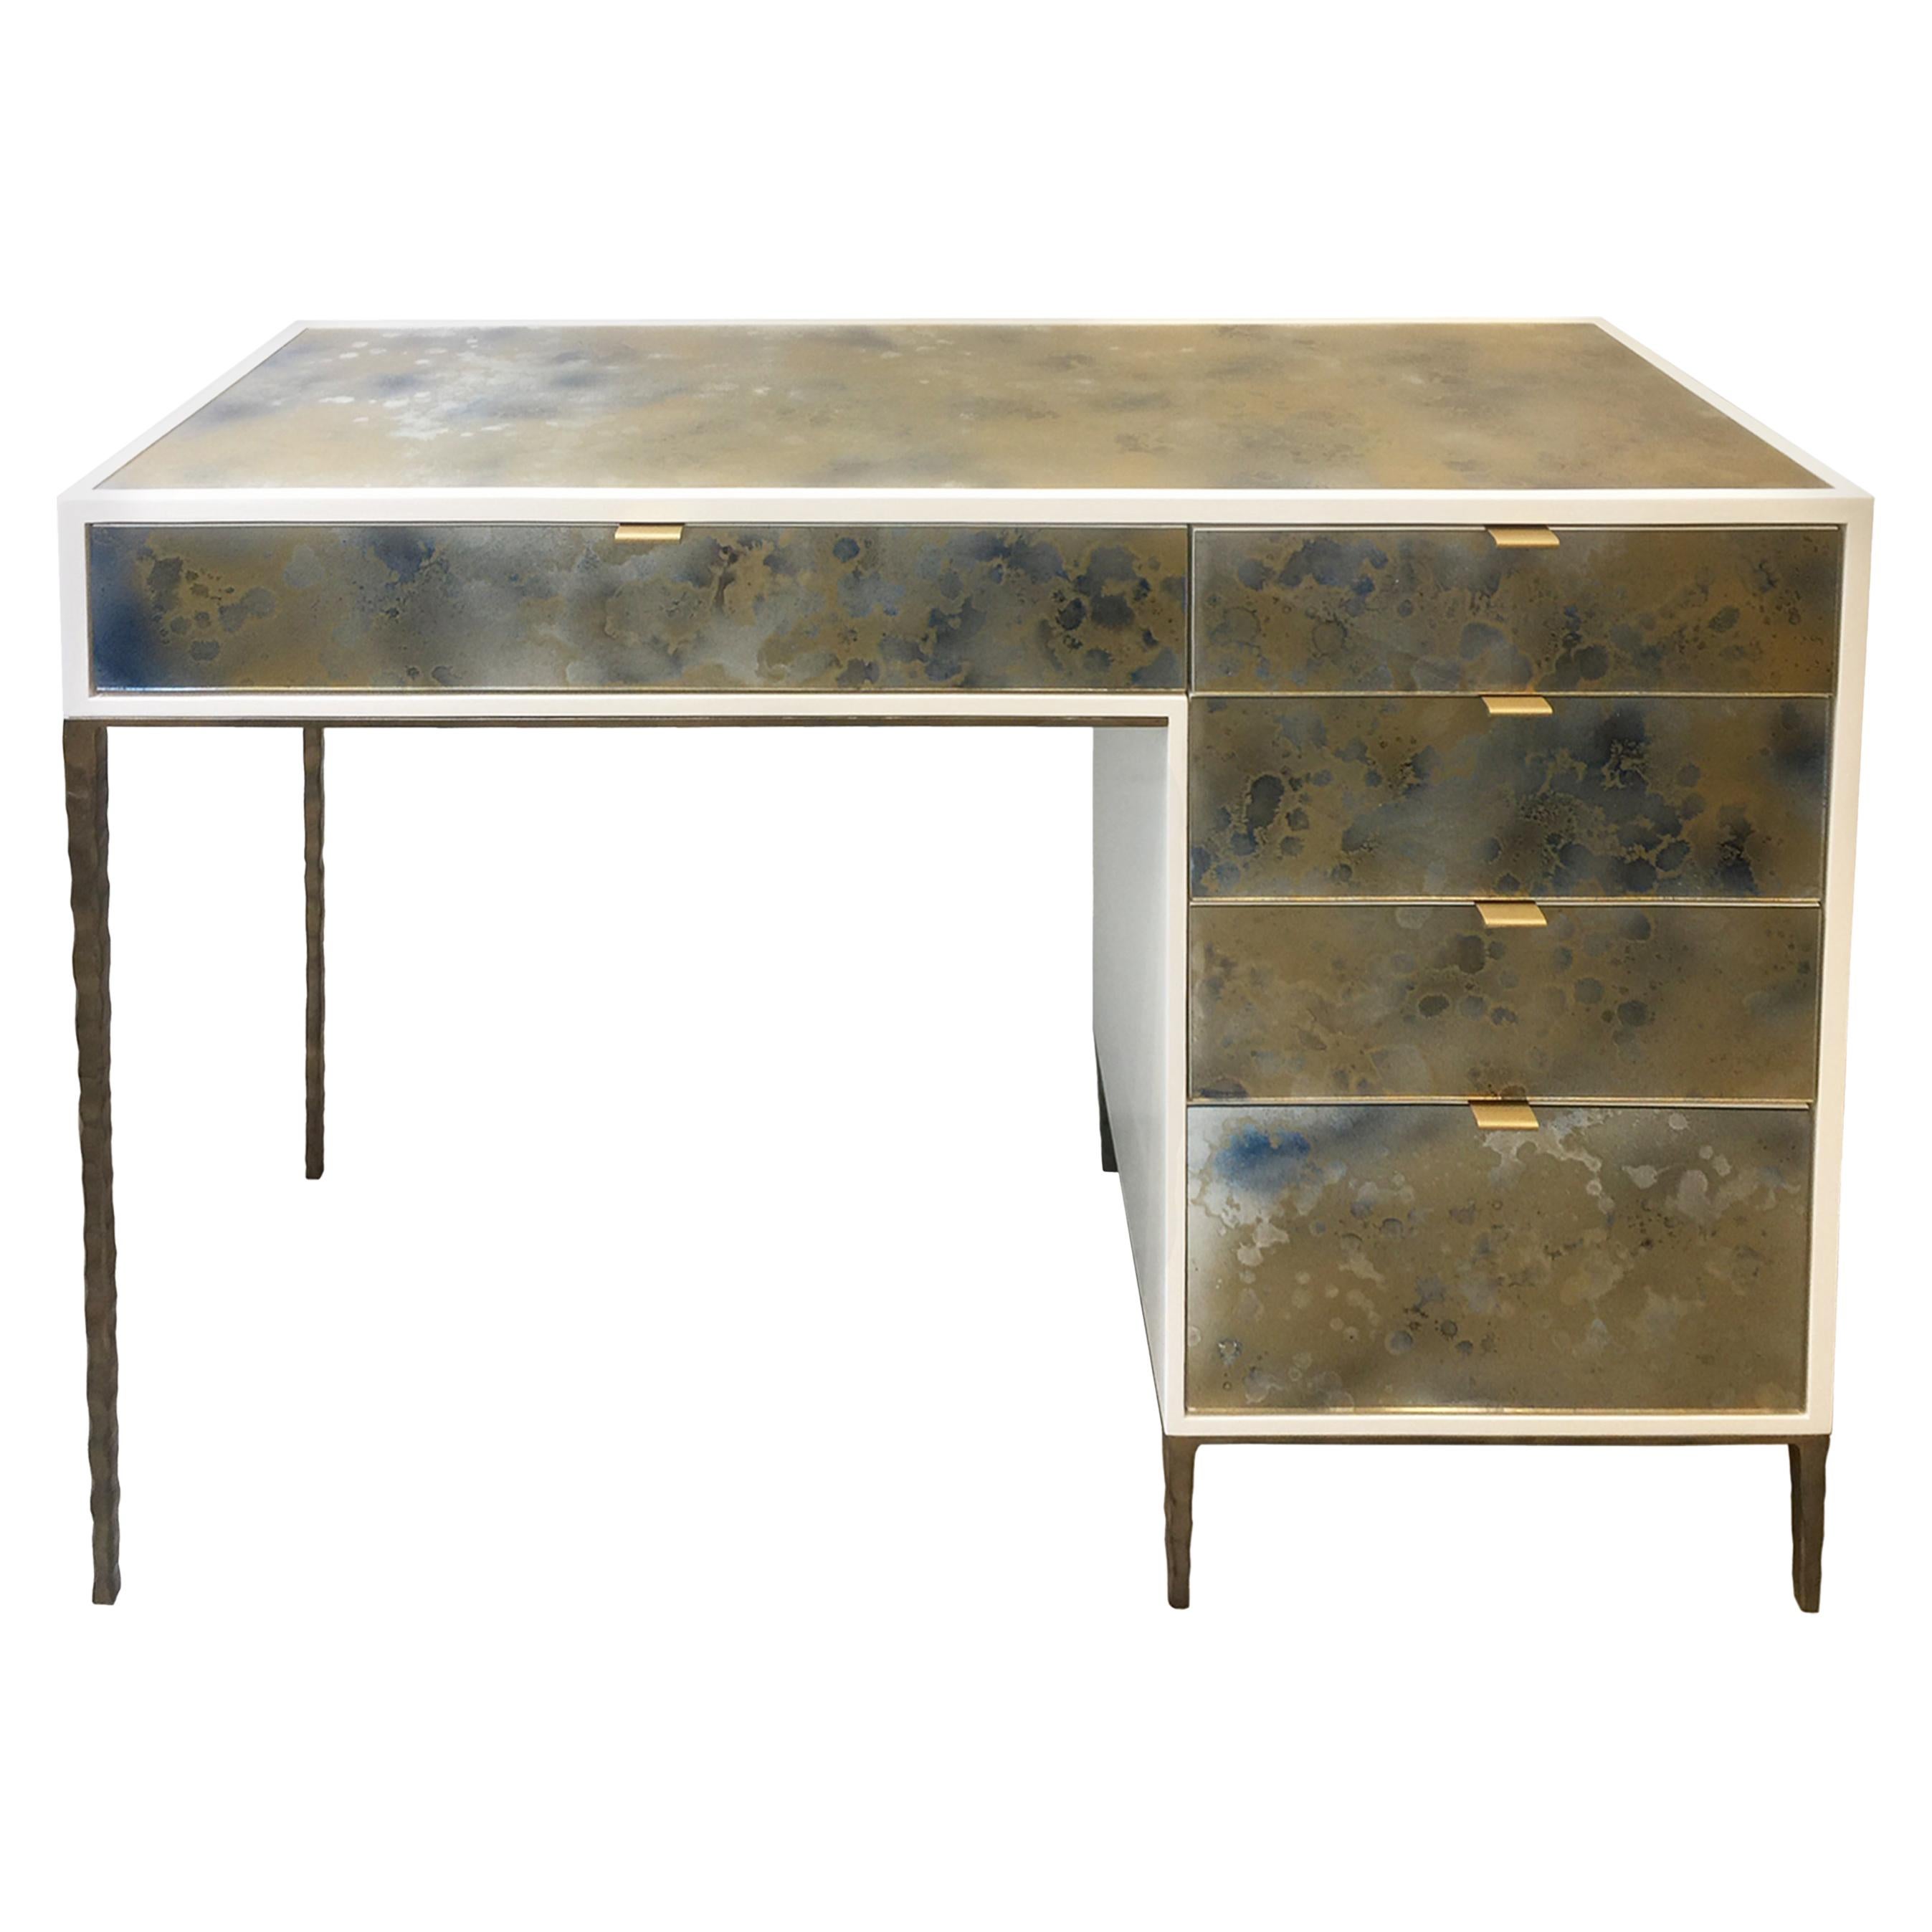 Contemporary Modern Eglomise Glass Byzantine Gold Vanity and Forged Metal Legs by Ercole Home For Sale